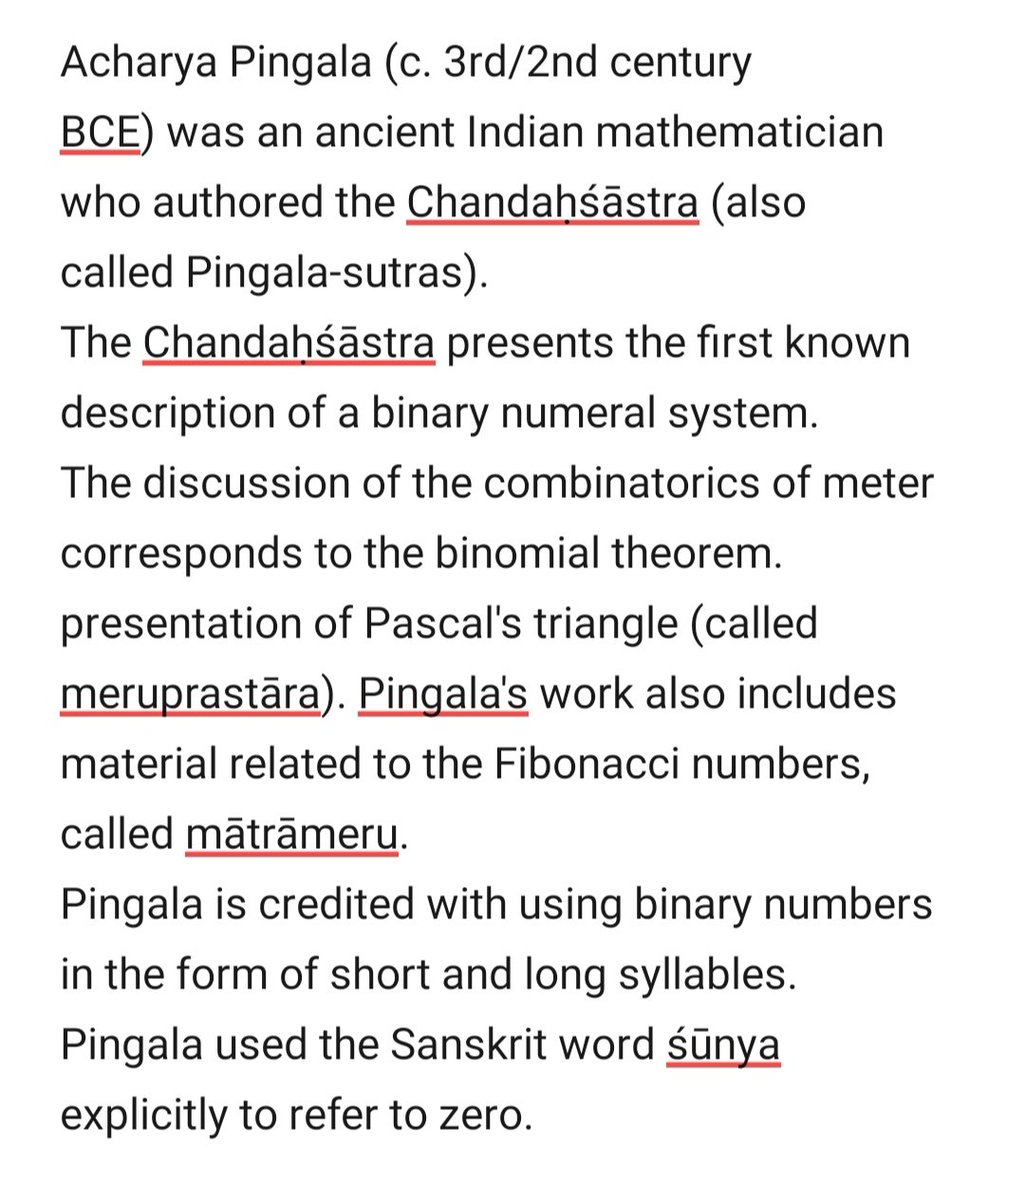 Brahmagupta gave the solution of the general linear equation in chapter eighteen of Brahmasphutasiddhānta.Brahmagupta's Brahmasphuṭasiddhānta is the first book that provides rules for arithmetic manipulations that apply to zero and to negative numbers.